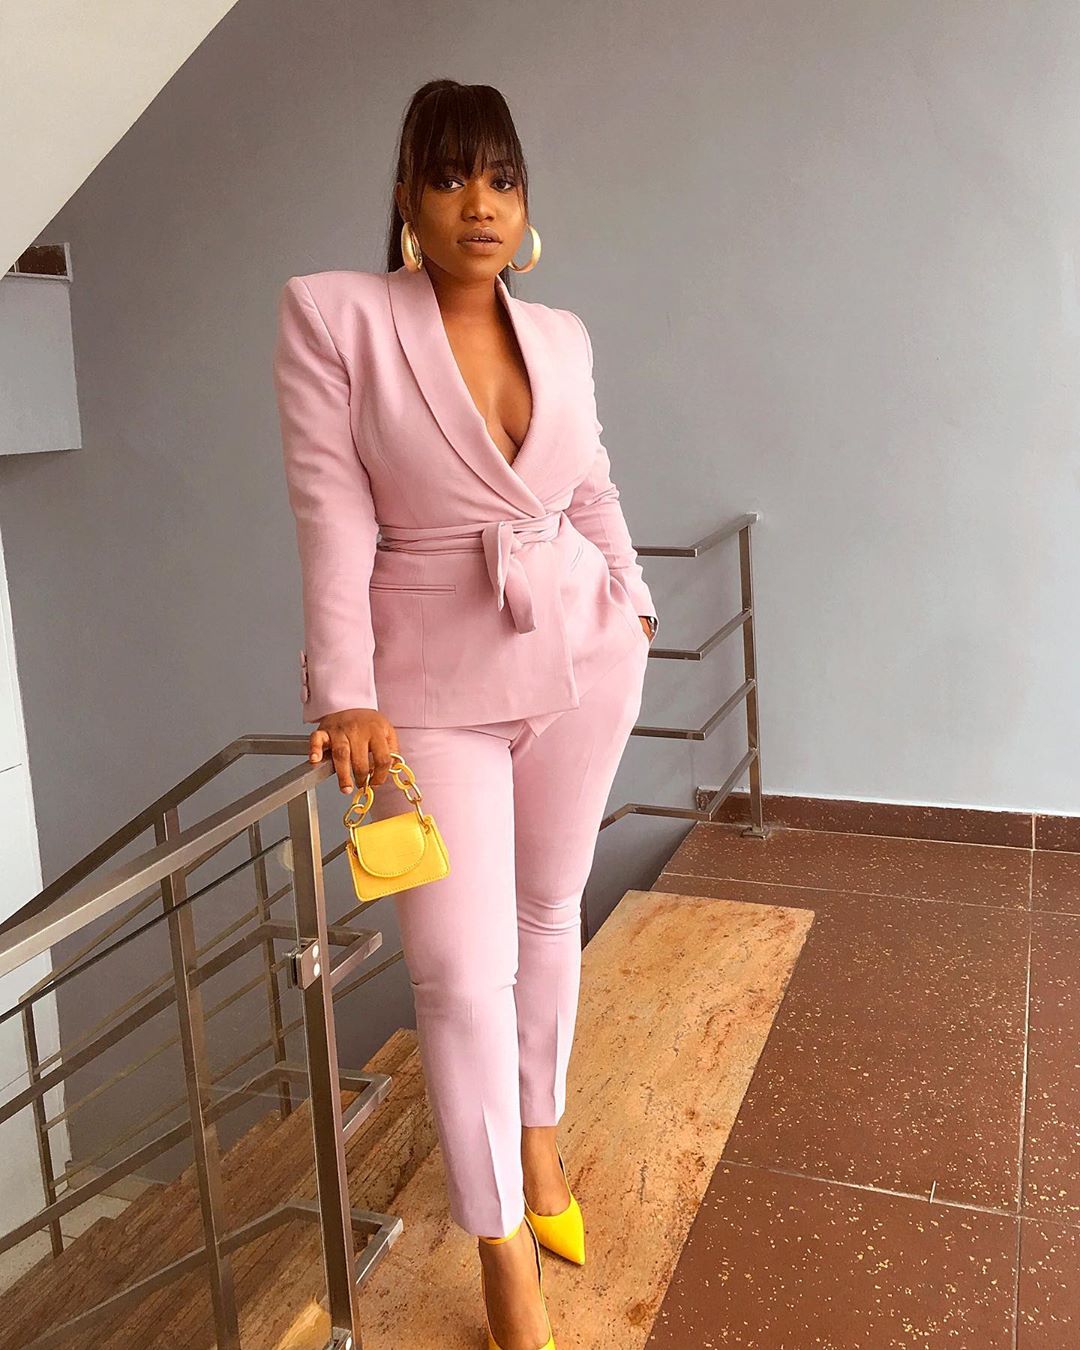 #BellaStylista: Issue 96 | The 2020 Way To Rock Suits | BN Style